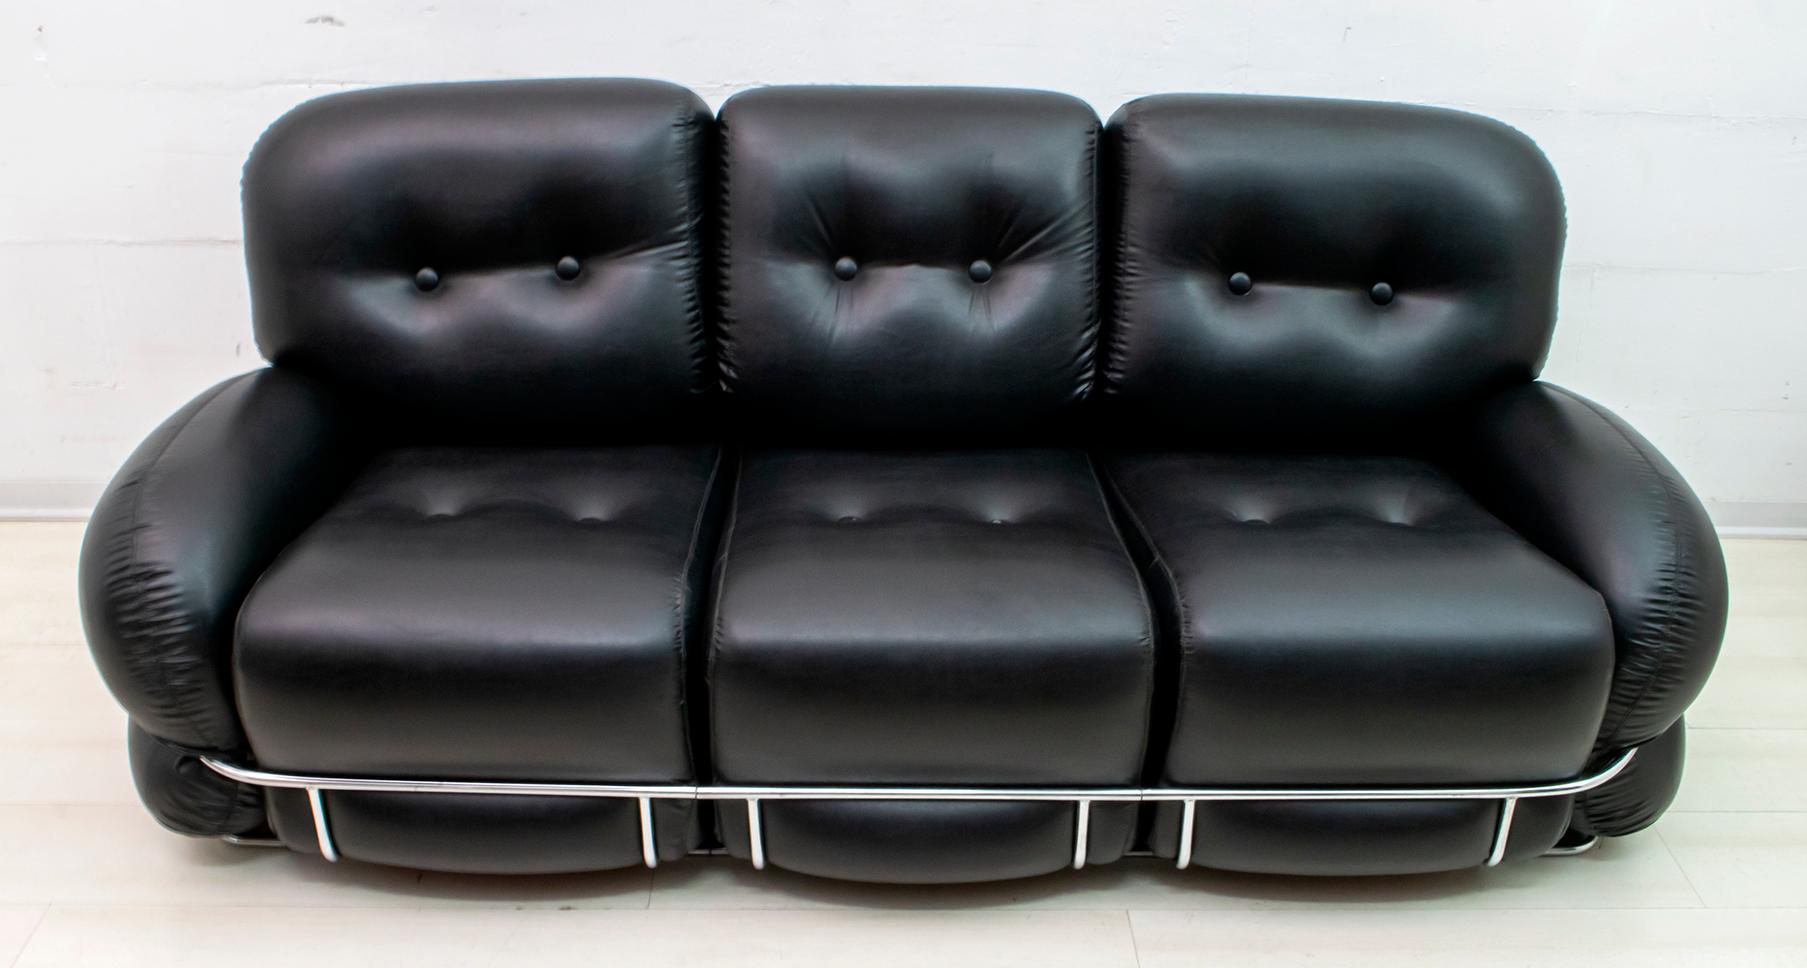 Designed by the designer, painter and sculptor, Adriano Piazzesi (1923 - 2009), this soft black leather sofa with a chromed tubular steel structure in which the soft foam cushions are inserted, as light as inflatable, as he would like to imitate.